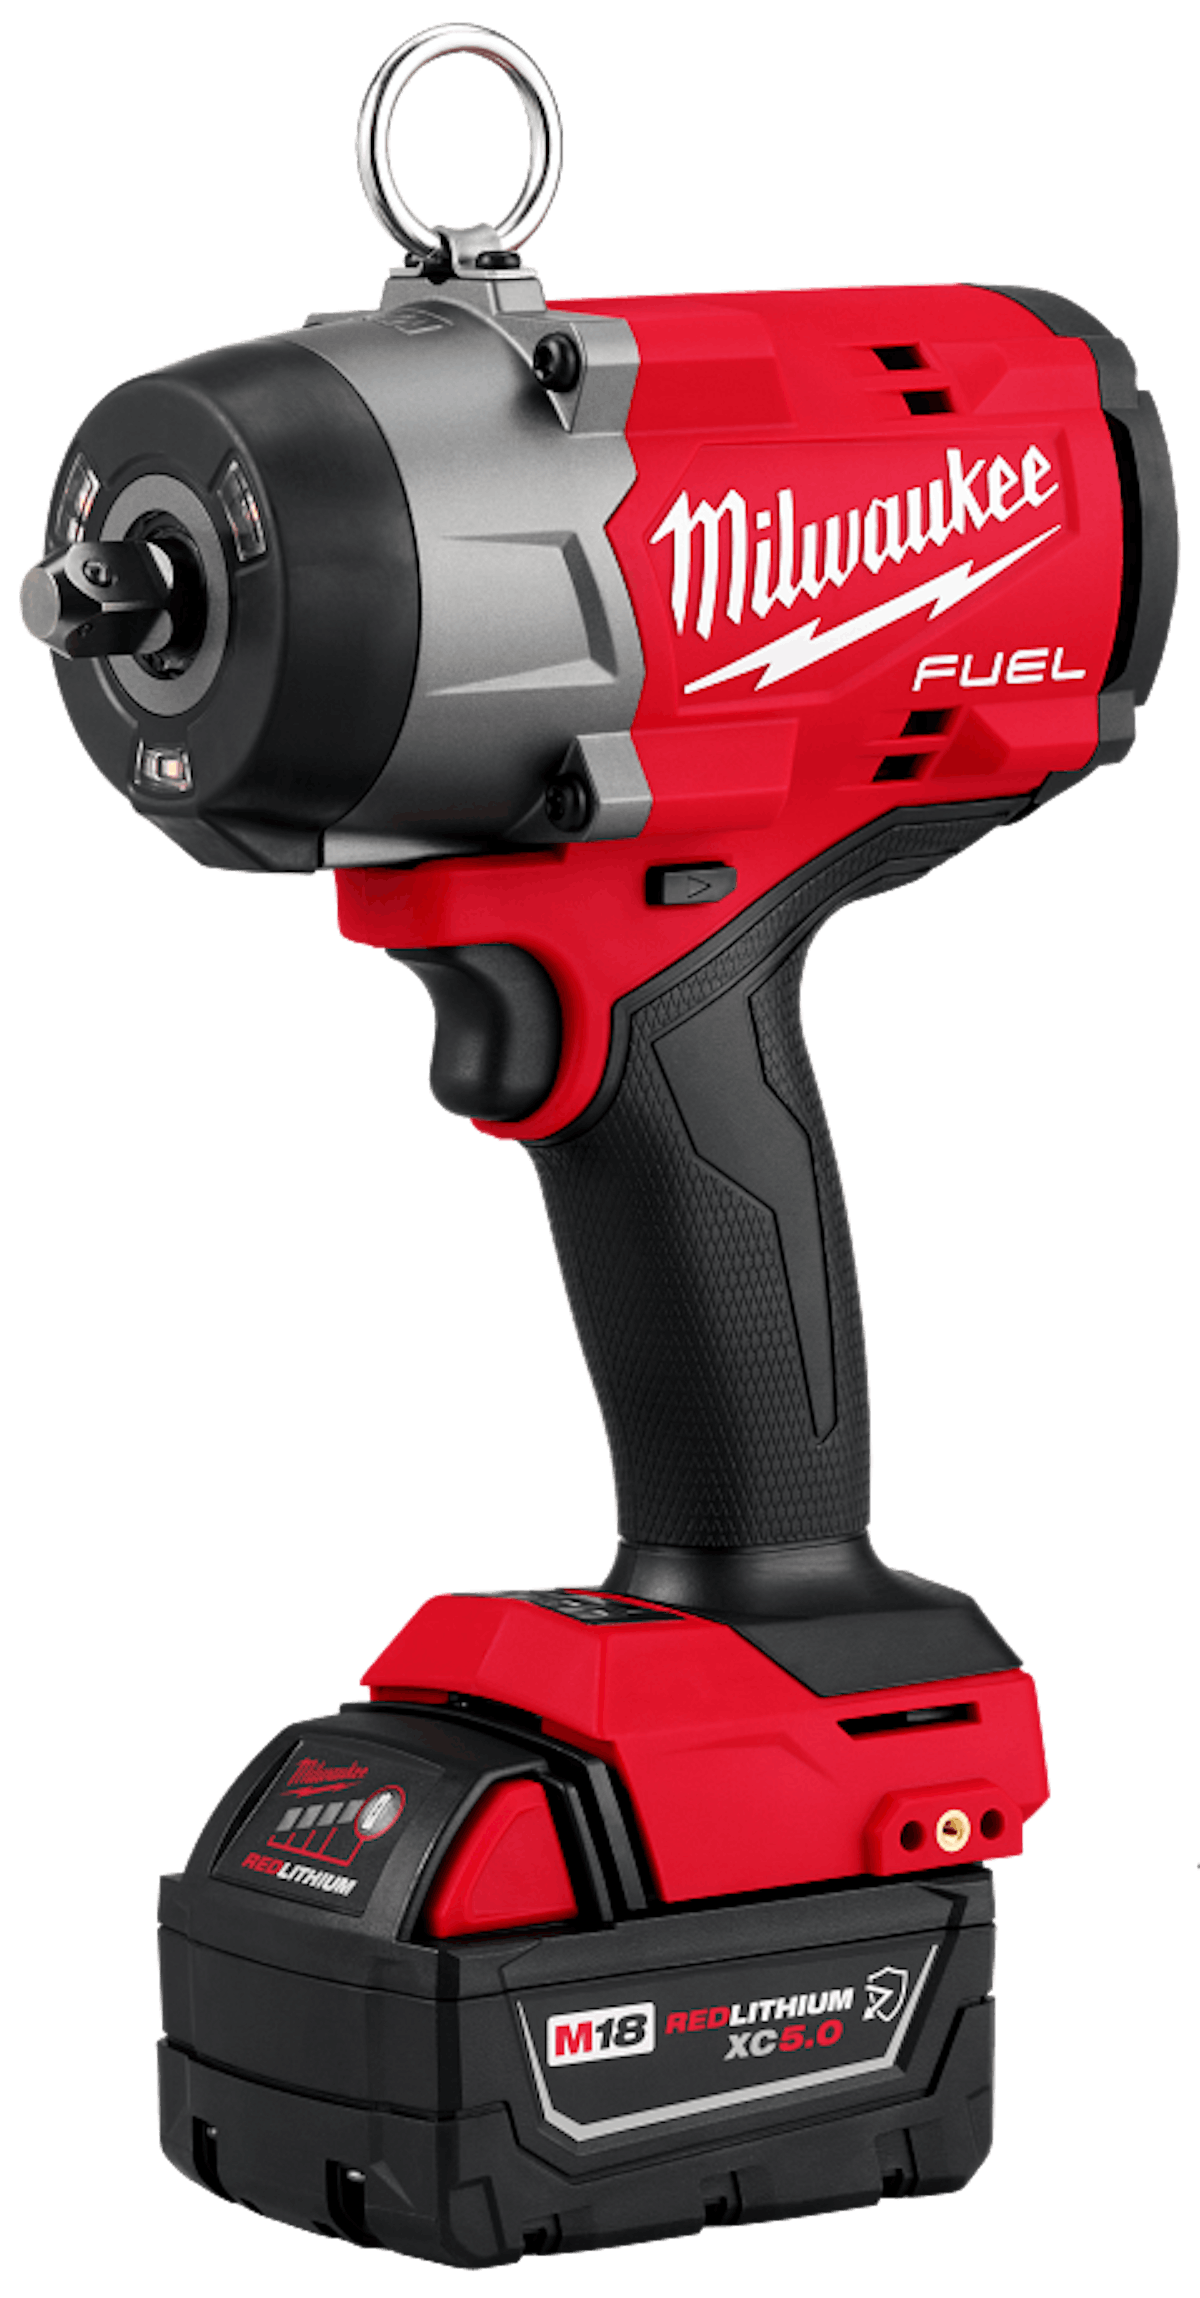 Milwaukee, M18 FUEL 1/2in. High Torque Impact Wrench (Tool Only), Drive  Size 1/2 in, Max. Torque 1200 ft-lbs., Volts 18 Model# 2967-20